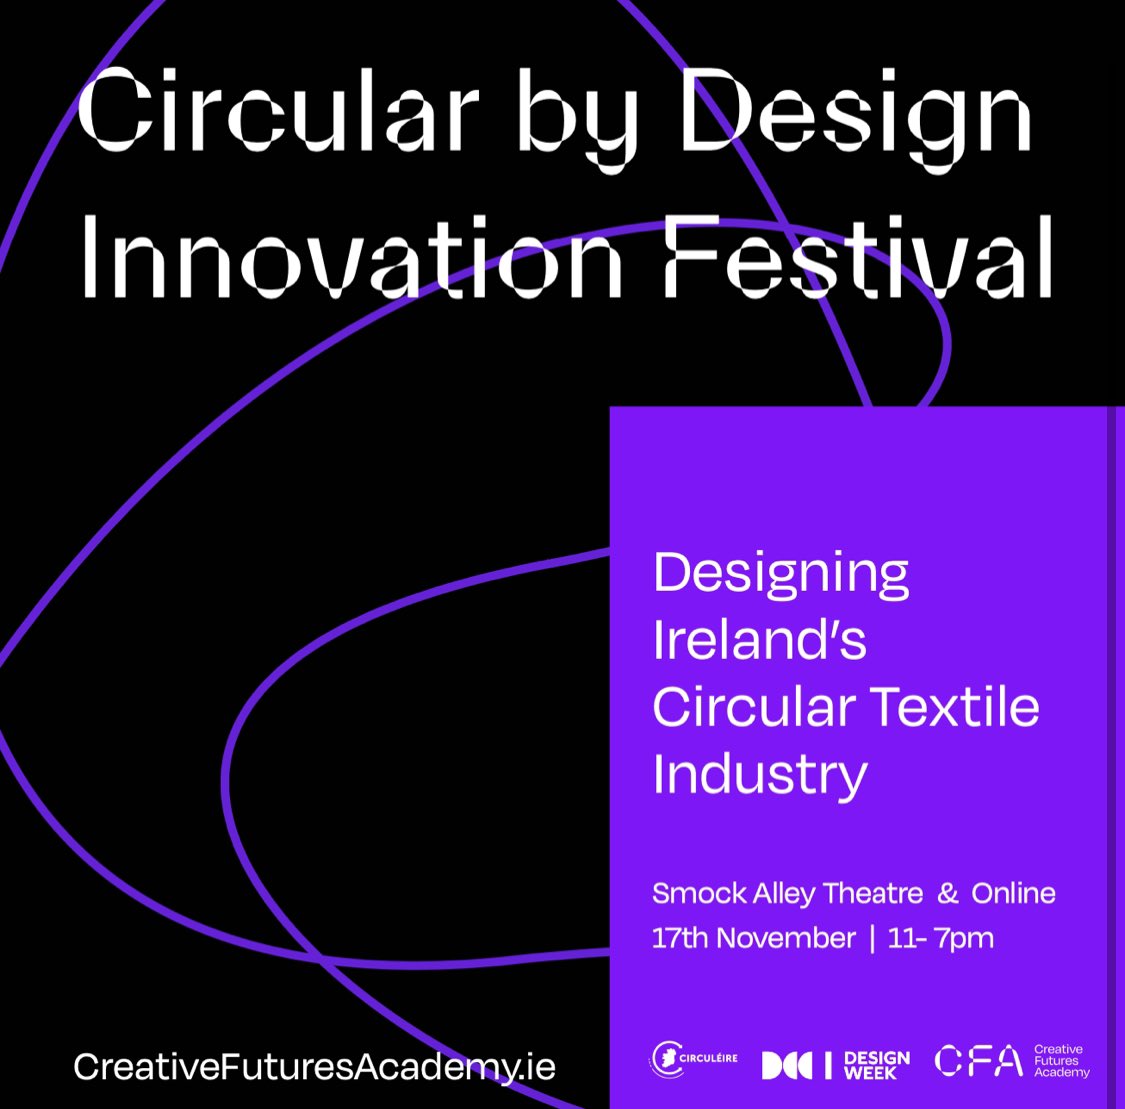 The 1st #CircularbyDesign Innovation Festival in Ireland takes place on Thurs. 17th Nov. @smockalley as part of #DesignWeekIreland Co-hosted by @creativefutur16 @NCAD_Dublin & DCCI, made possible with the support of @circuleire Innovation Fund. bit.ly/3FmNINn